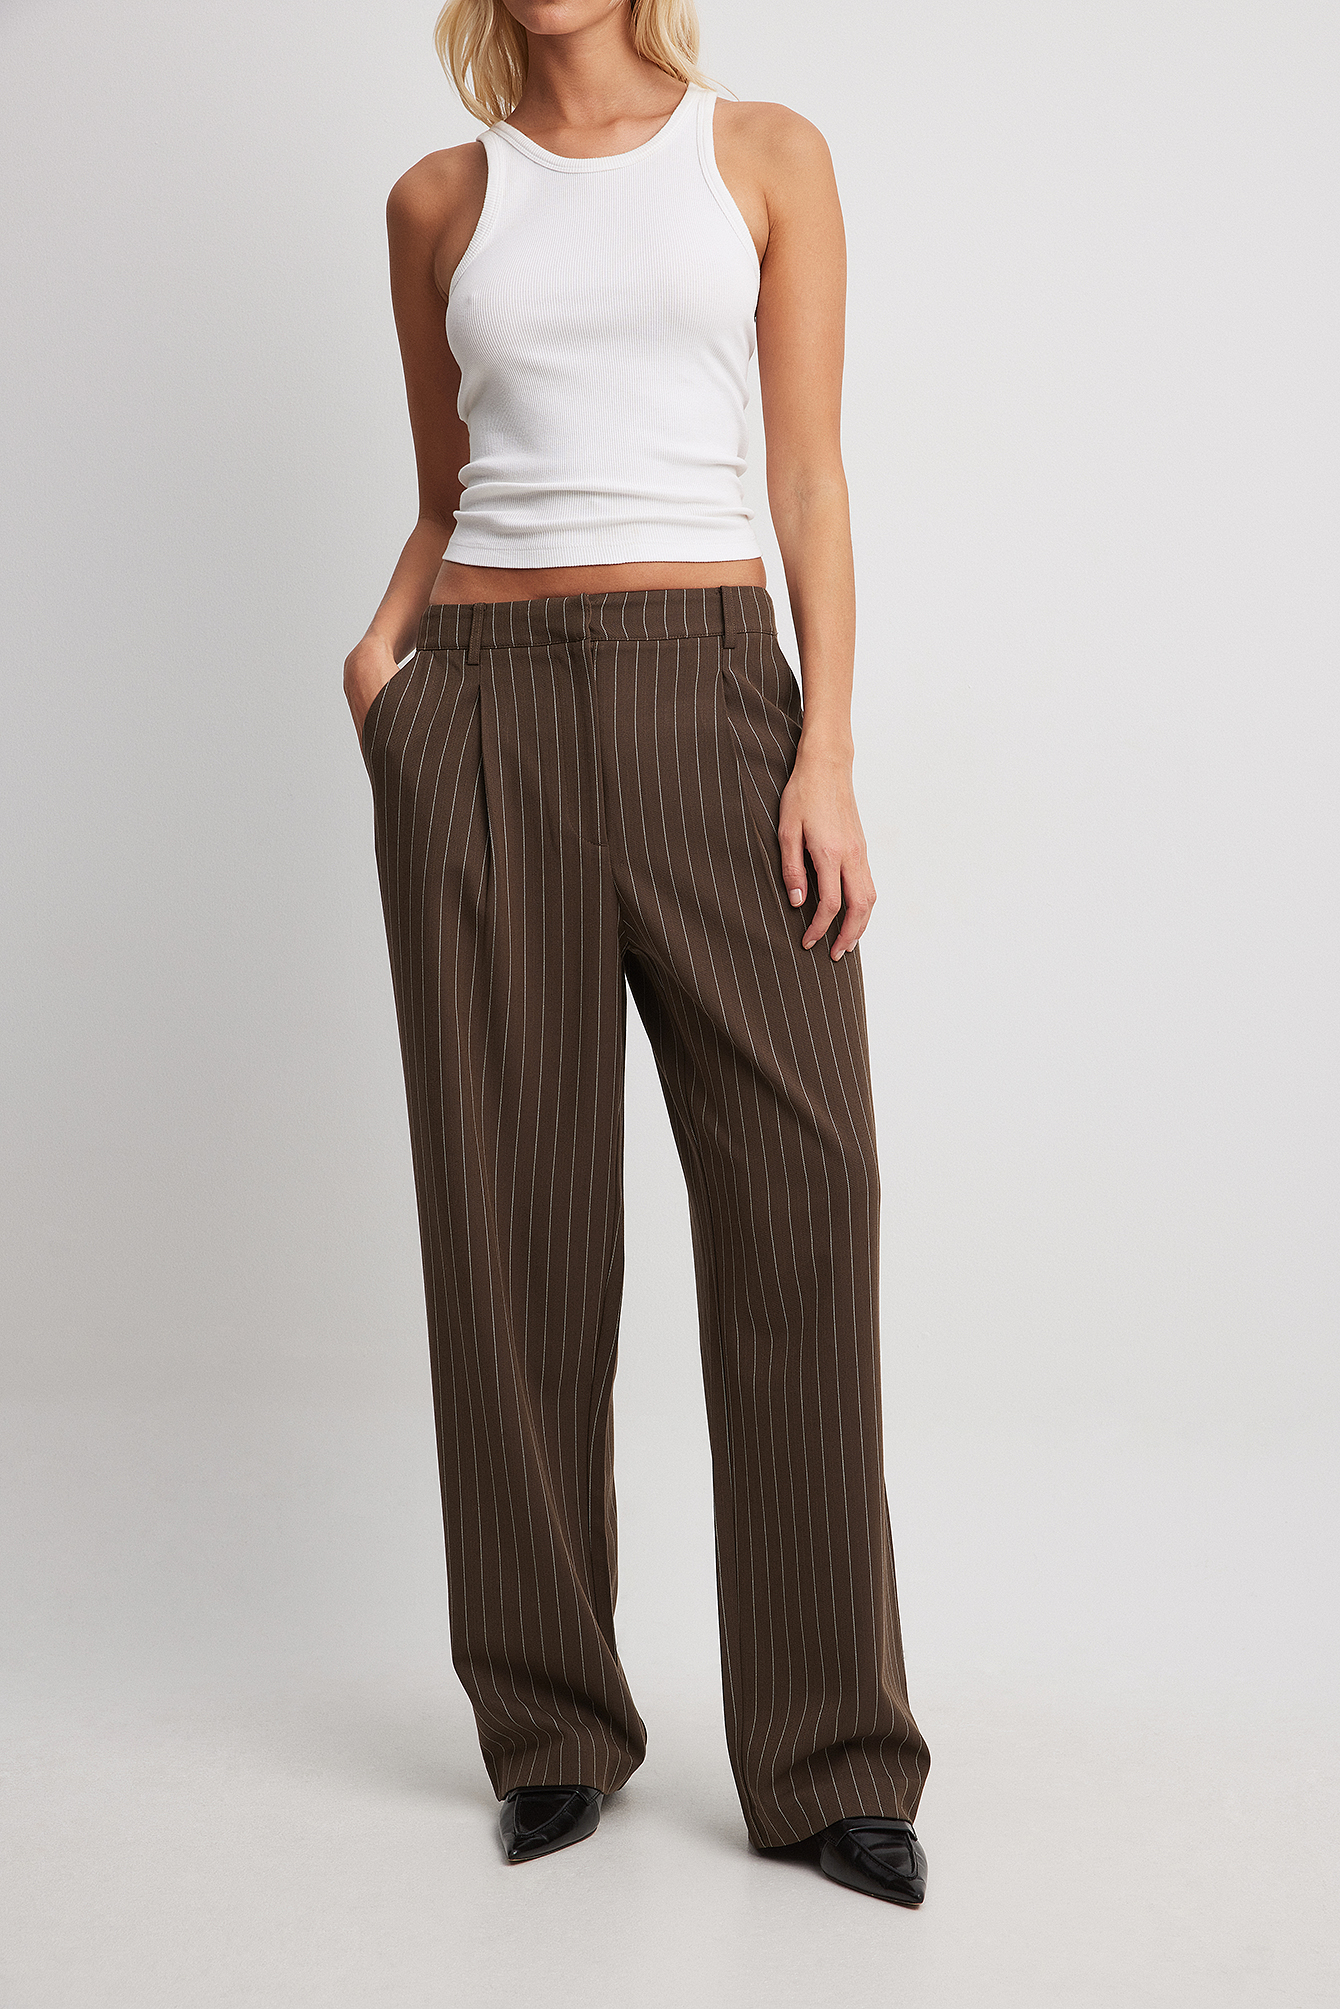 Women High Waist Palazzo Wide Leg Flared Stretch Pants Casual Baggy Yoga  Trousers